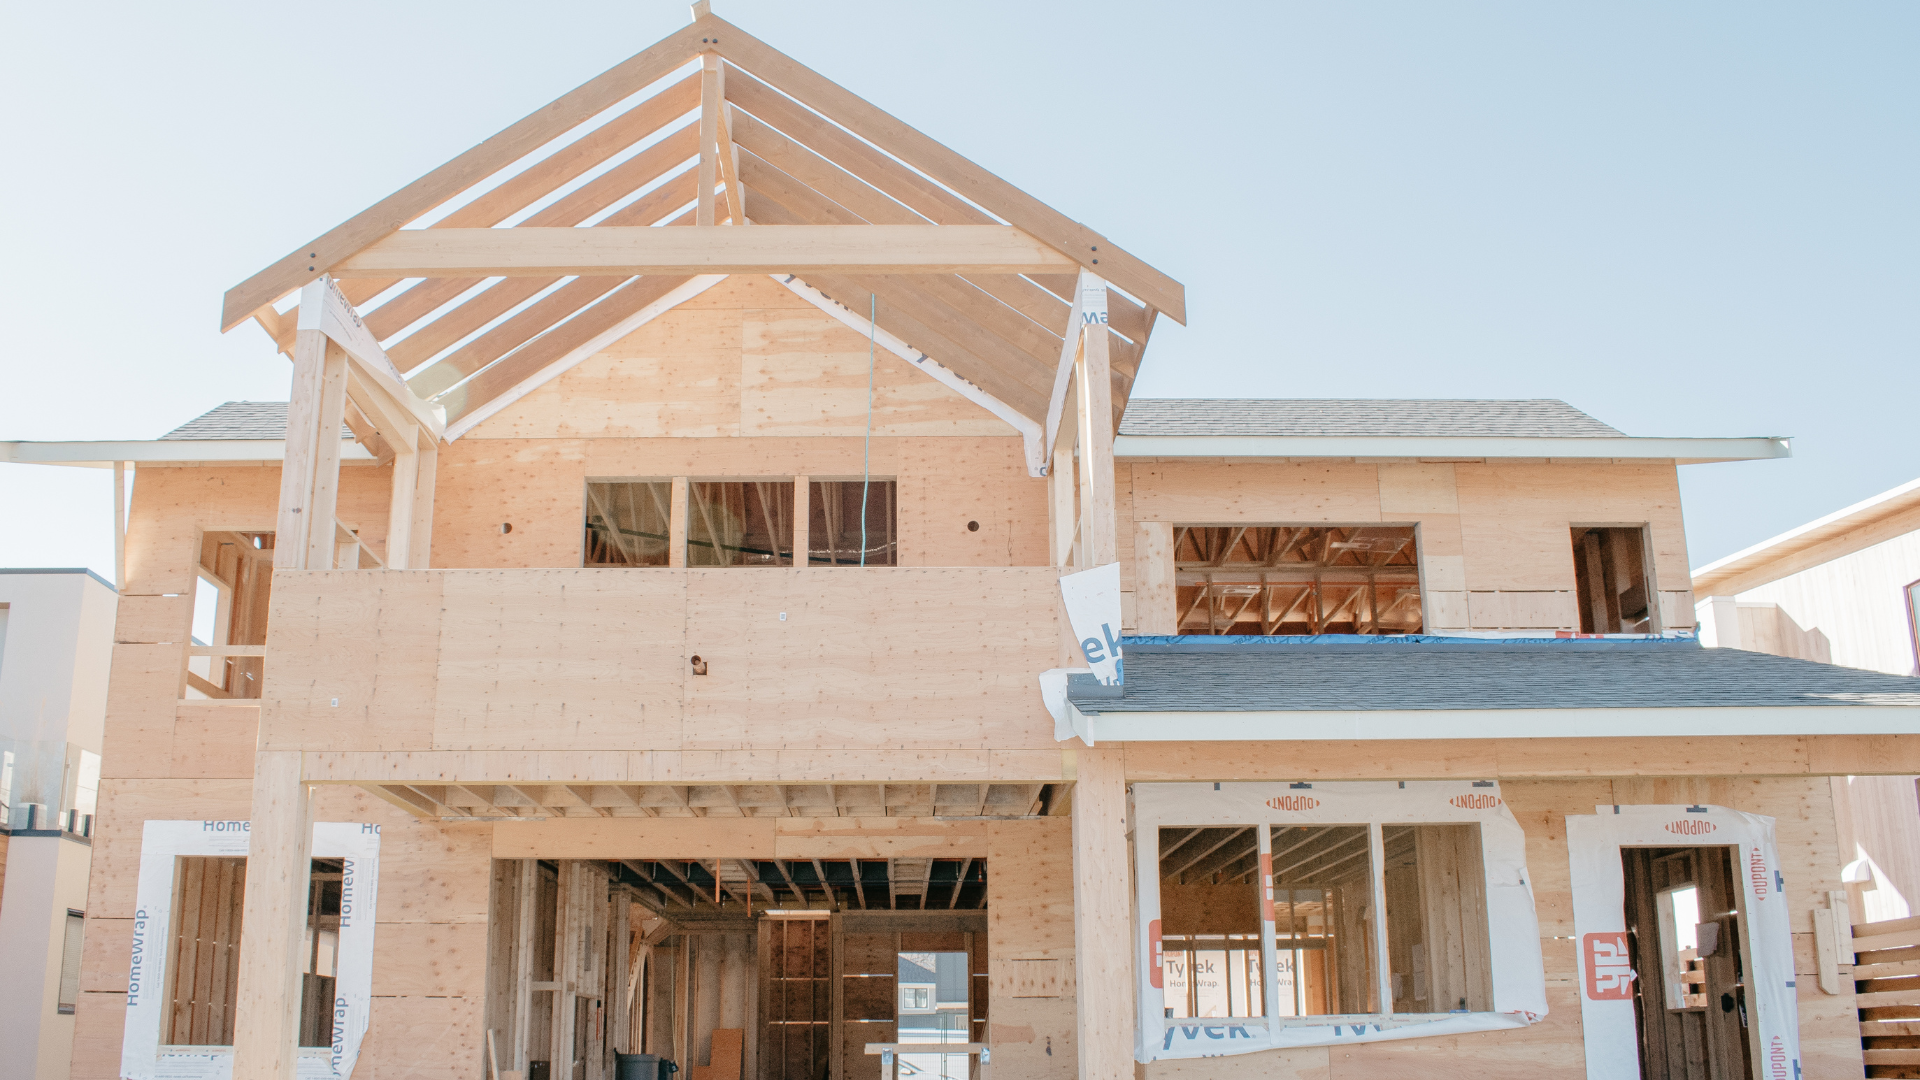  With over 20 years of residential home building experience, Square Foot Construction looks forward to offering local South Okanagan residents quality construction services that are affordable, reliable and look beautiful from the inside out. 